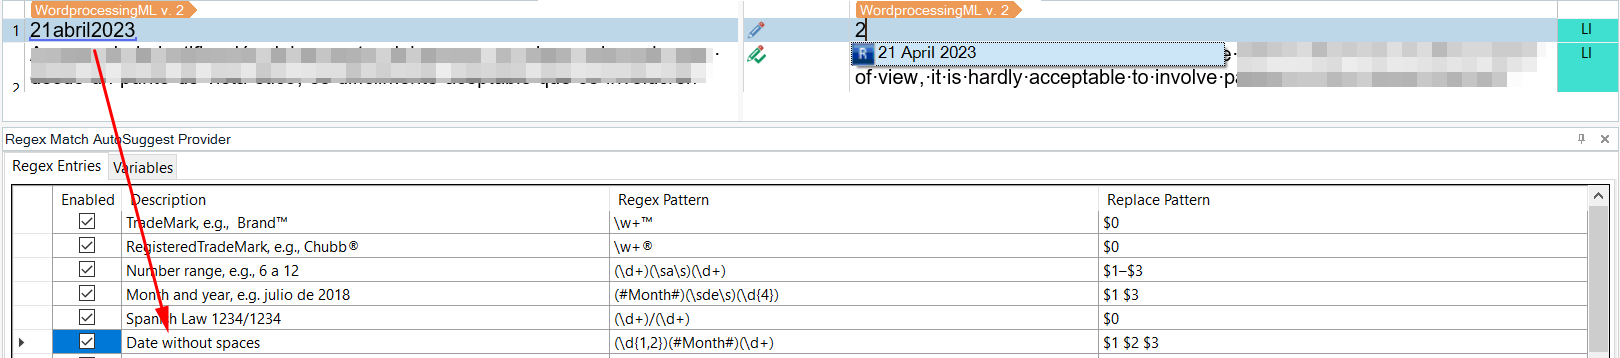 Screenshot of Trados Studio interface showing a source segment '21abril2023' with a red underline indicating an error, and the autosuggest popup displaying the corrected date format '21 April 2023'.